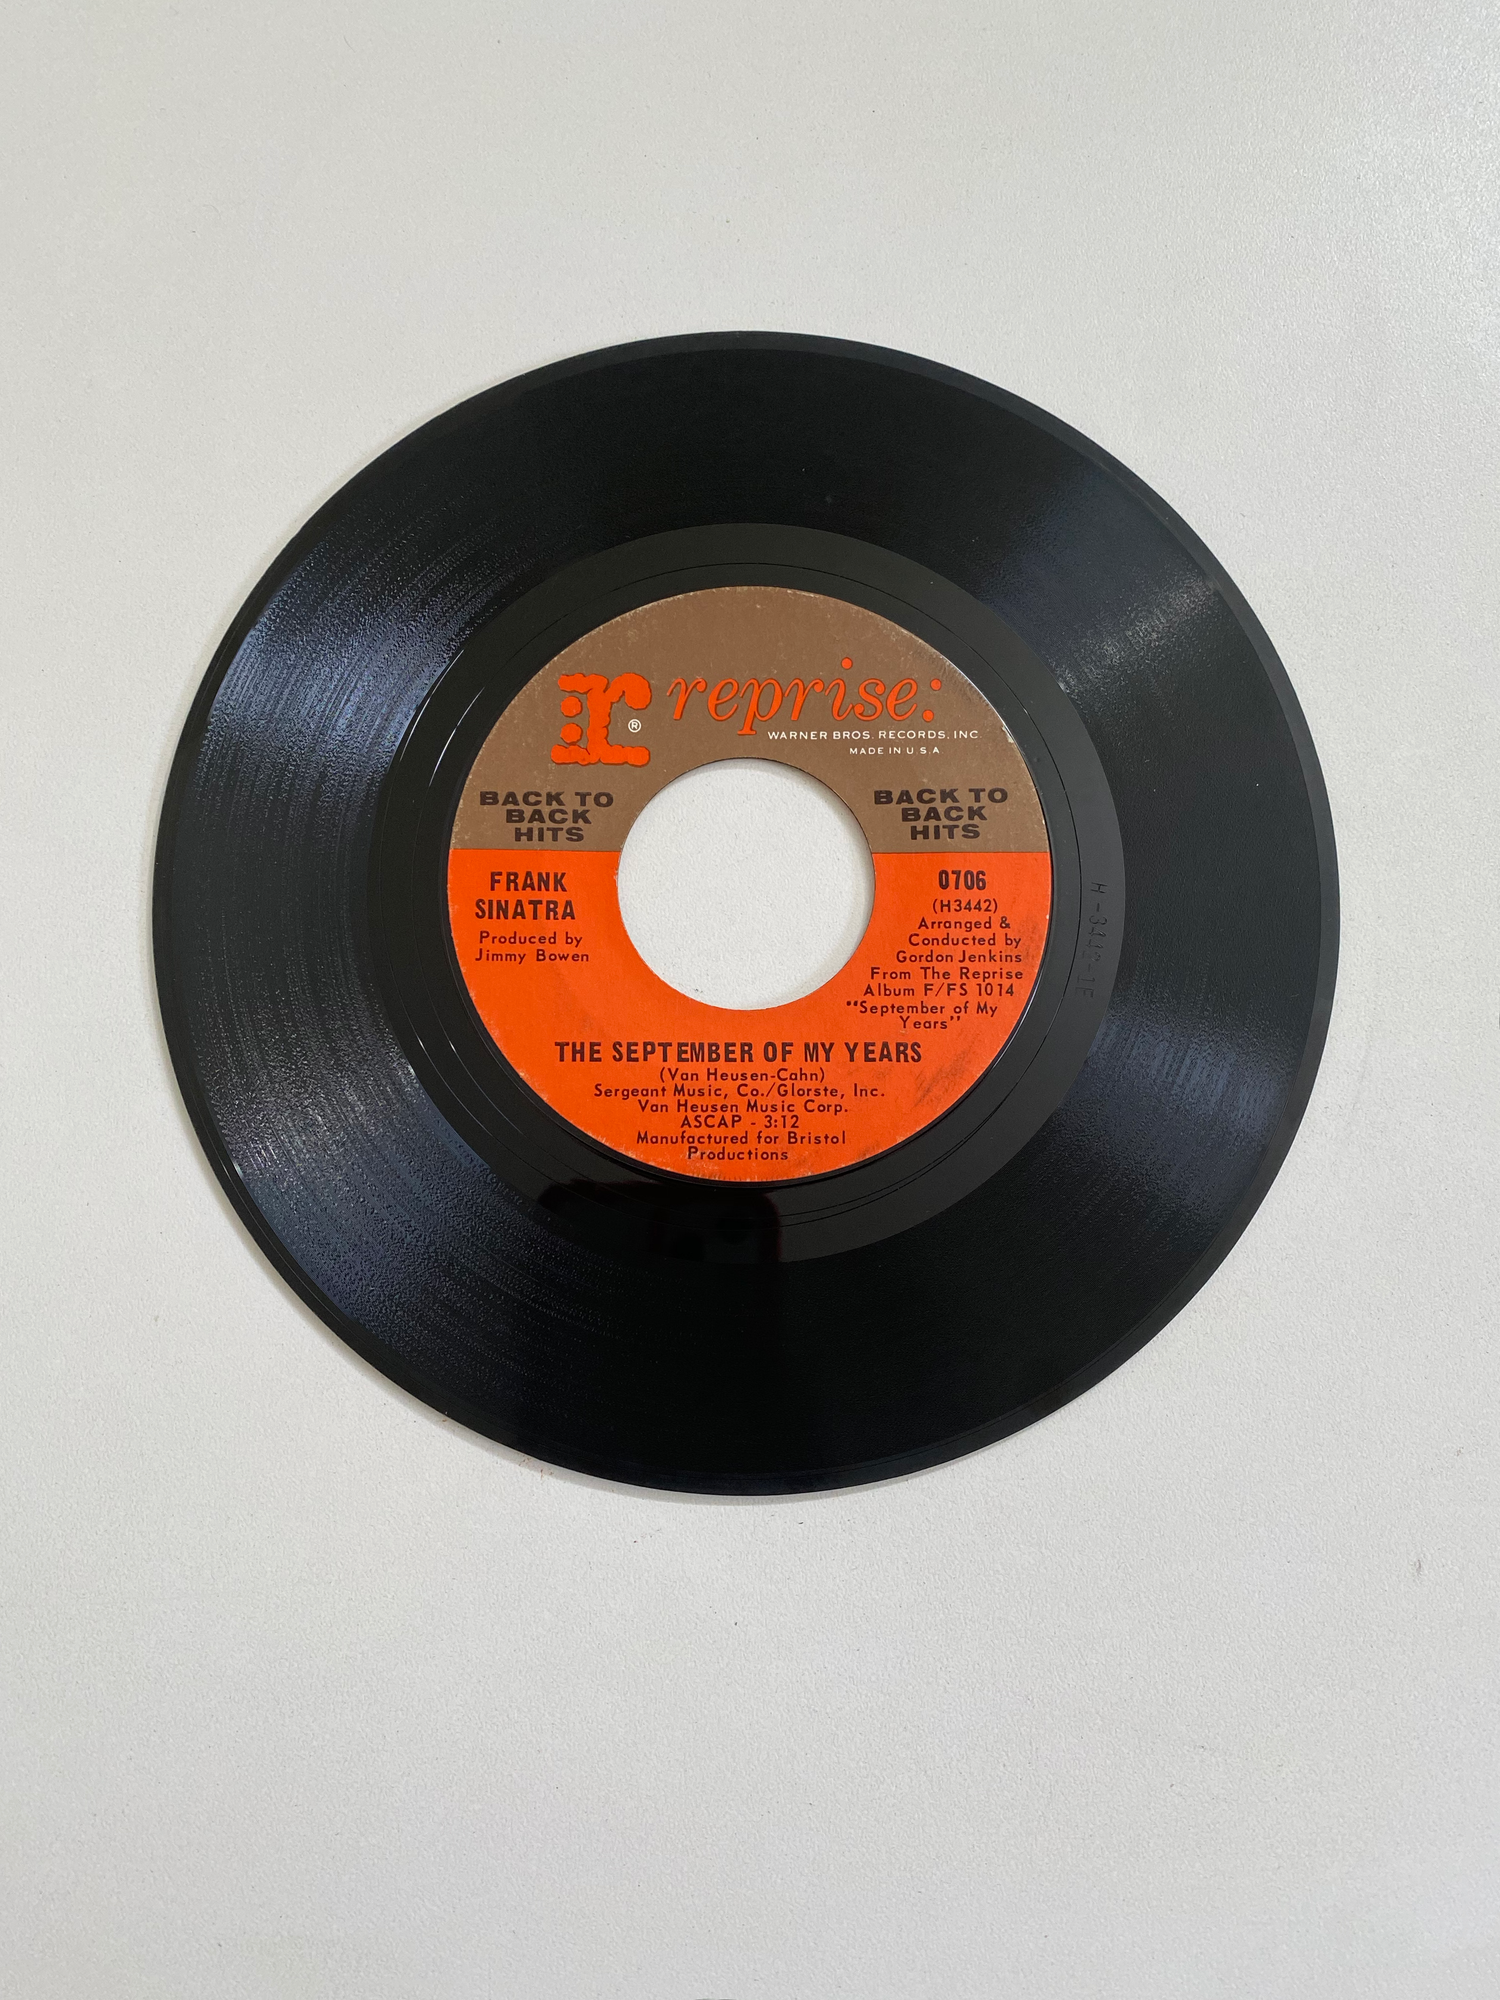 Frank Sinatra - The September of My Years | 45 The Vintedge Co.